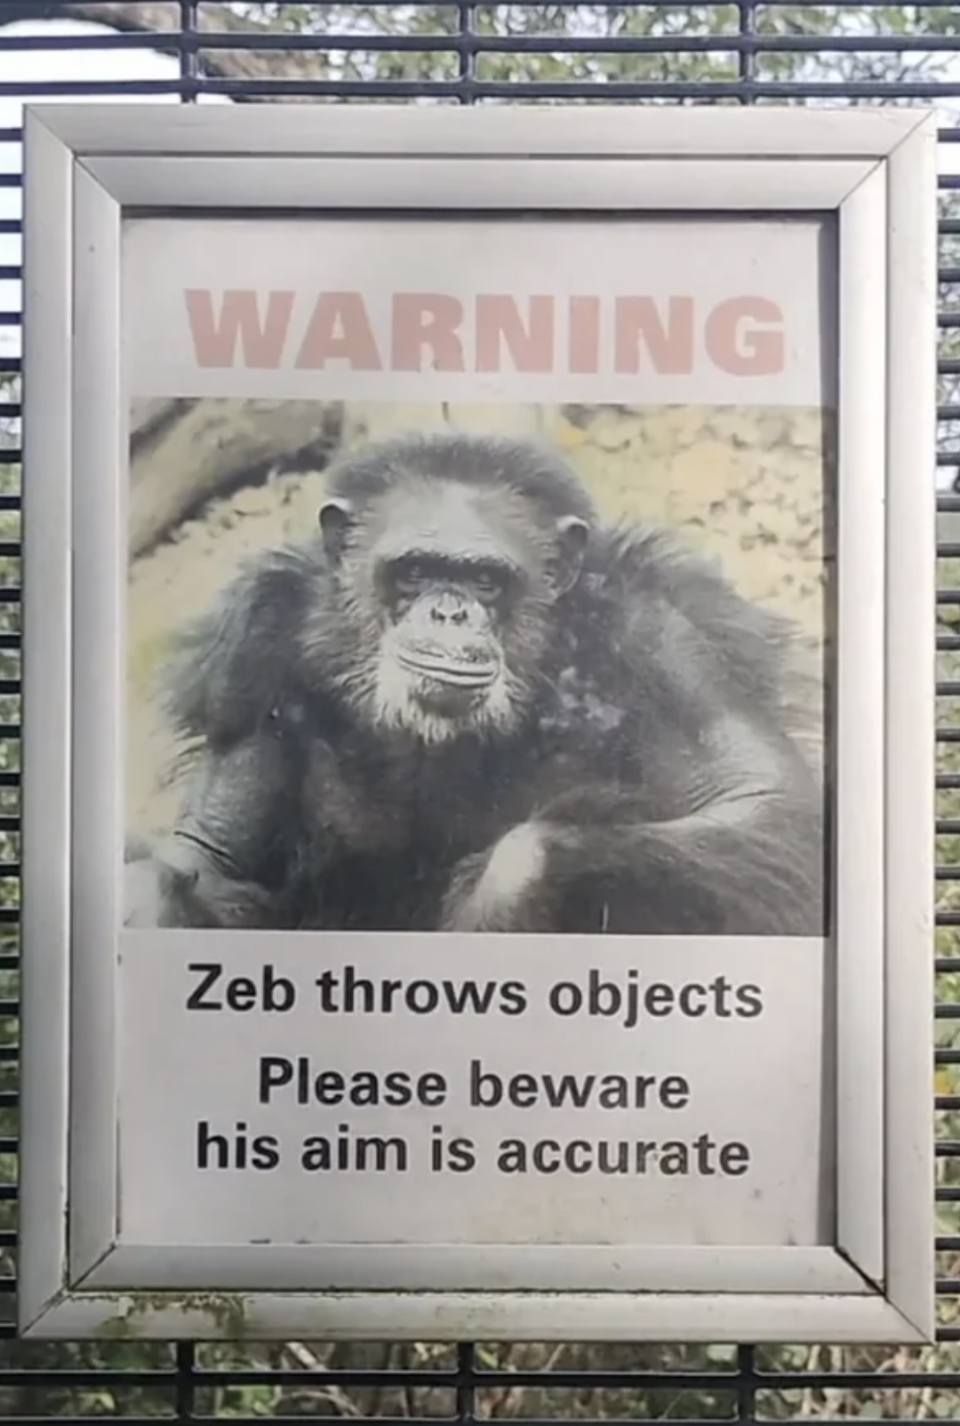 "Zeb throws objects"